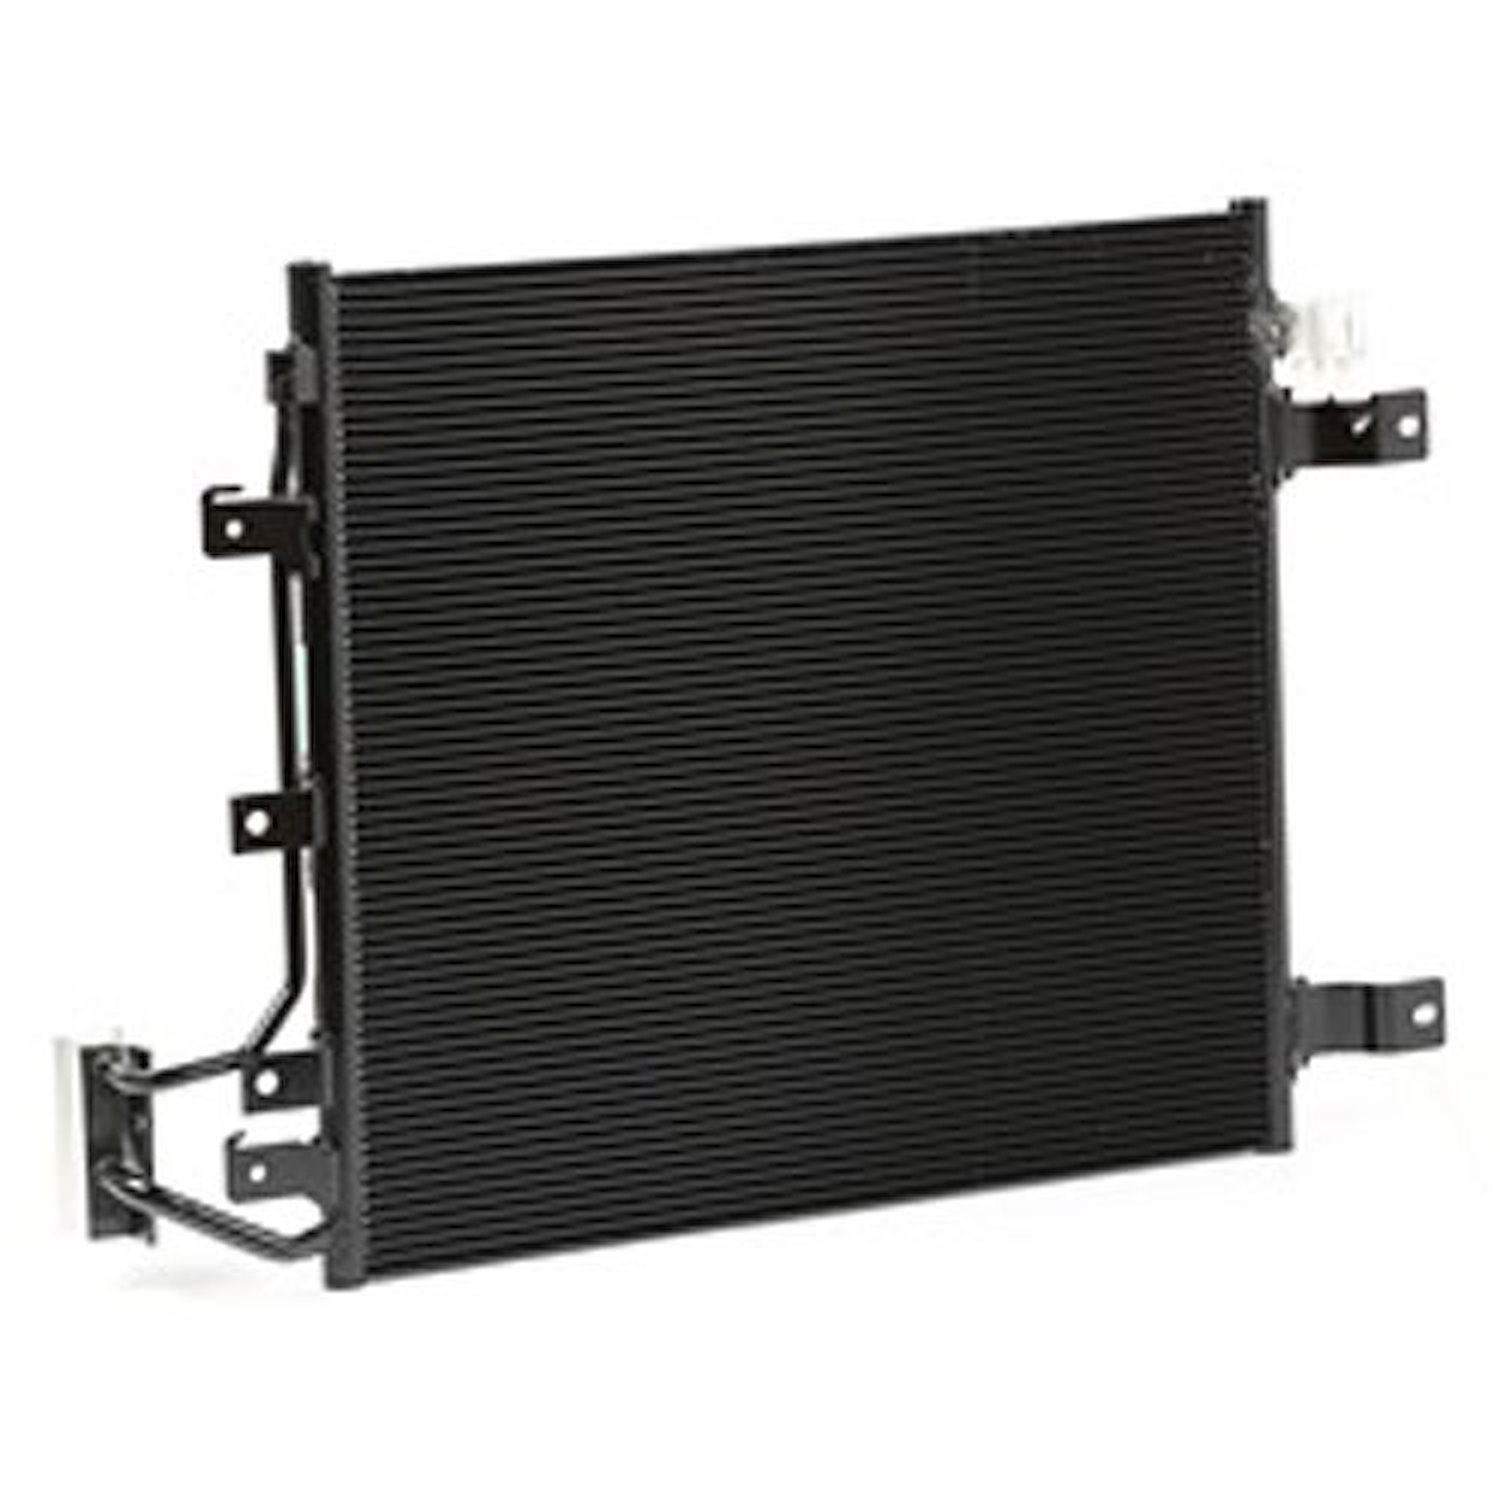 Replacement ac condenser from Omix-ADA, Fits 3.6L engines